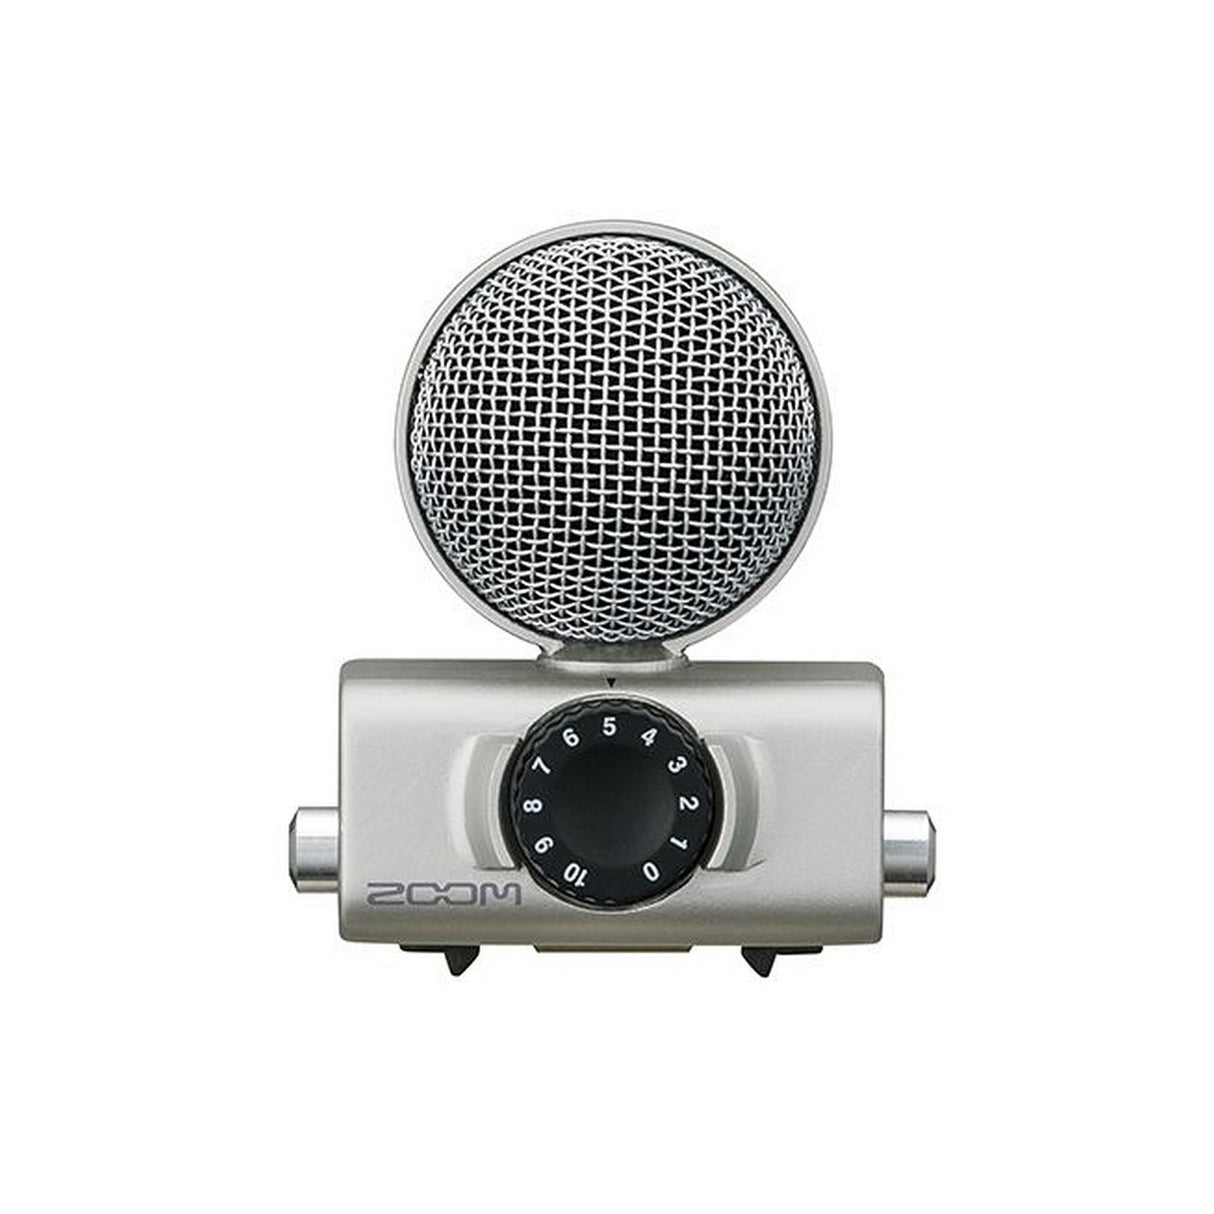 Zoom MSH-6 | Forward Unidirectional Side Bidirectional Stereo Capsule for Filmmaking Video Field Recorder Mic Microphone H5 H6 Q8 F8 ECM 3